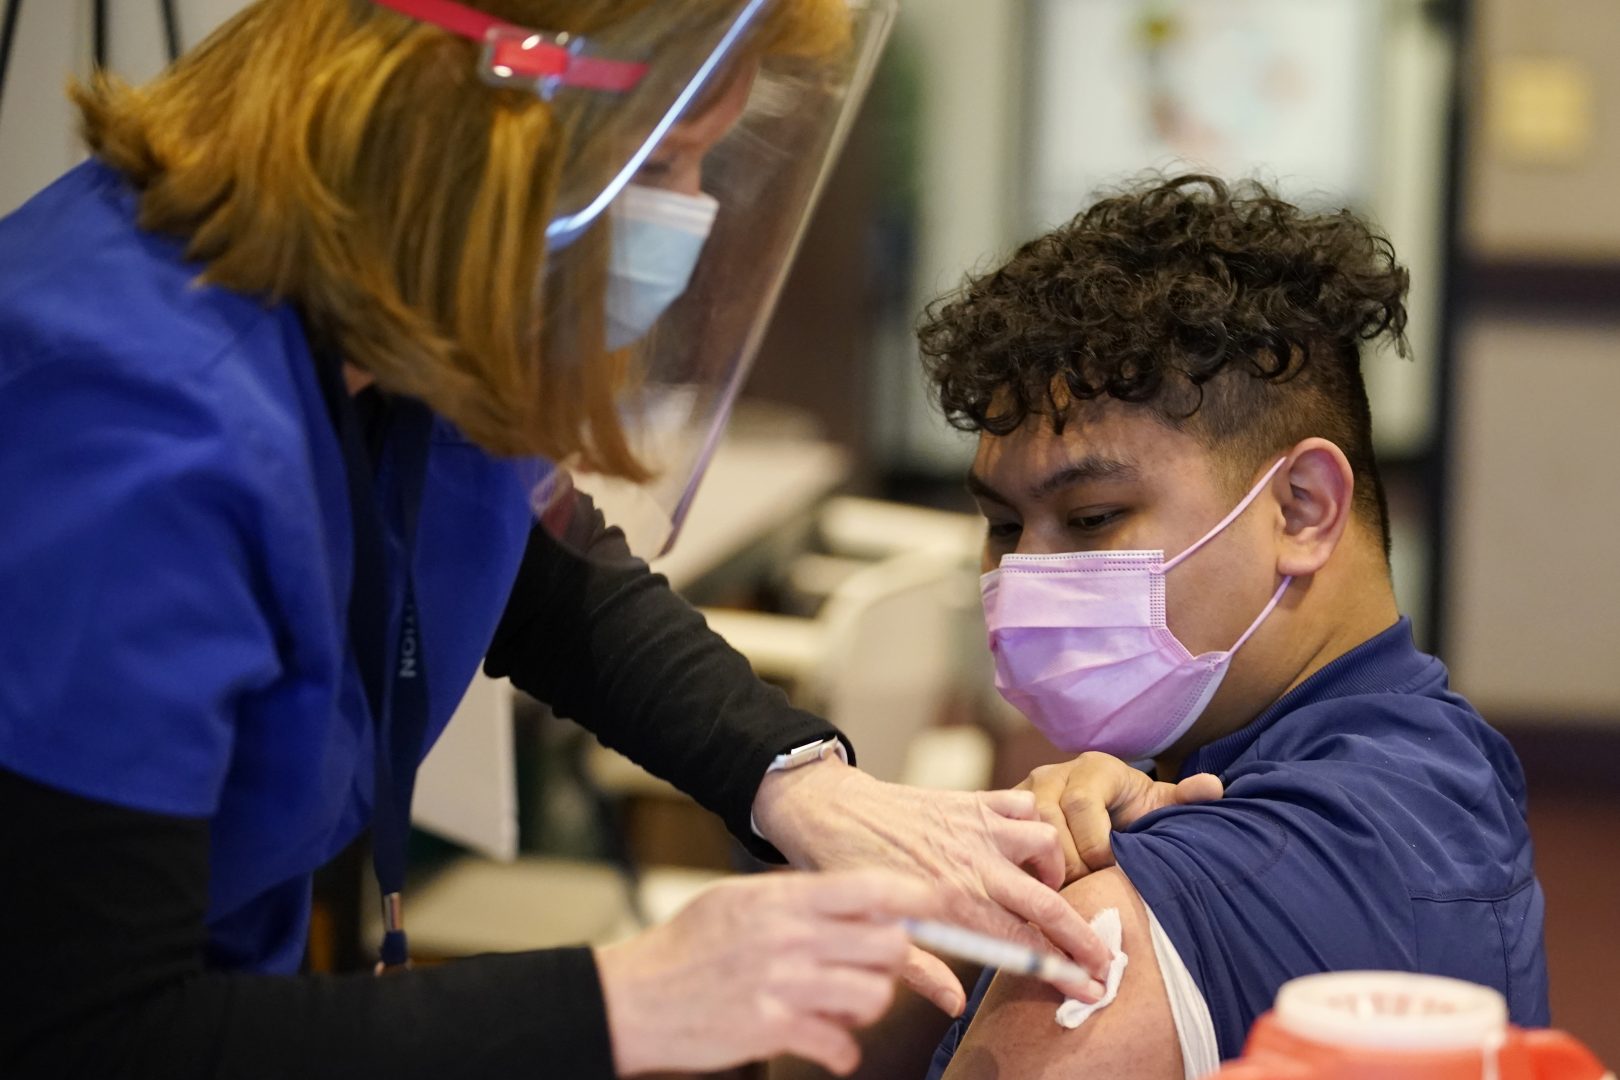 Penny Cracas, left, with the Chester County, Pa., Health Department, administers the Moderna COVID-19 vaccine to EMT Christian Ventura at the Chester County Government Services Center, Tuesday, Dec. 29, 2020, in West Chester, Pa. (AP Photo/Matt Slocum)